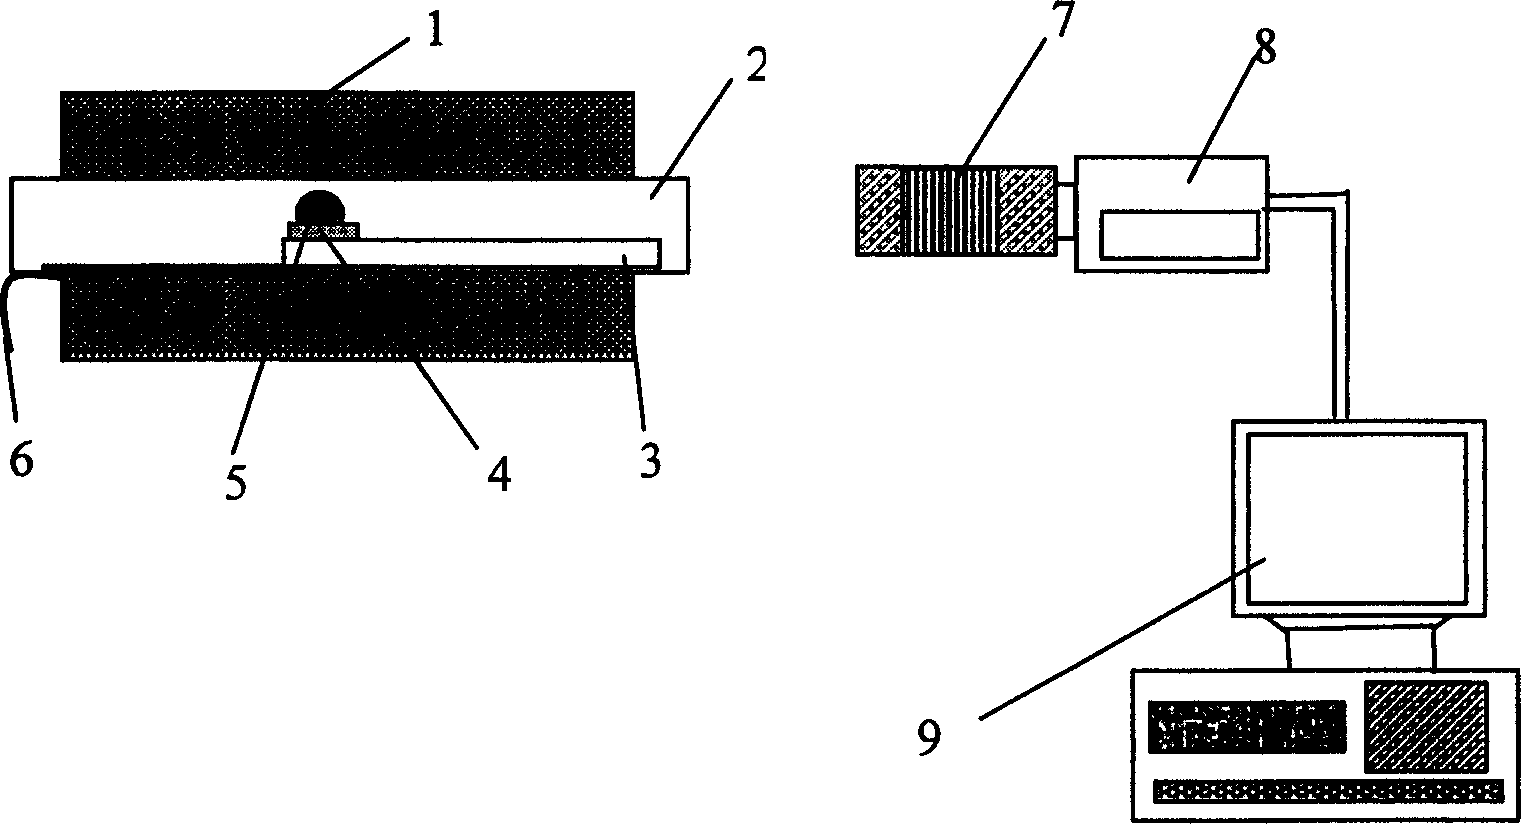 Device for on line measuring high temperatare fused body surface temsion, contact angle and density